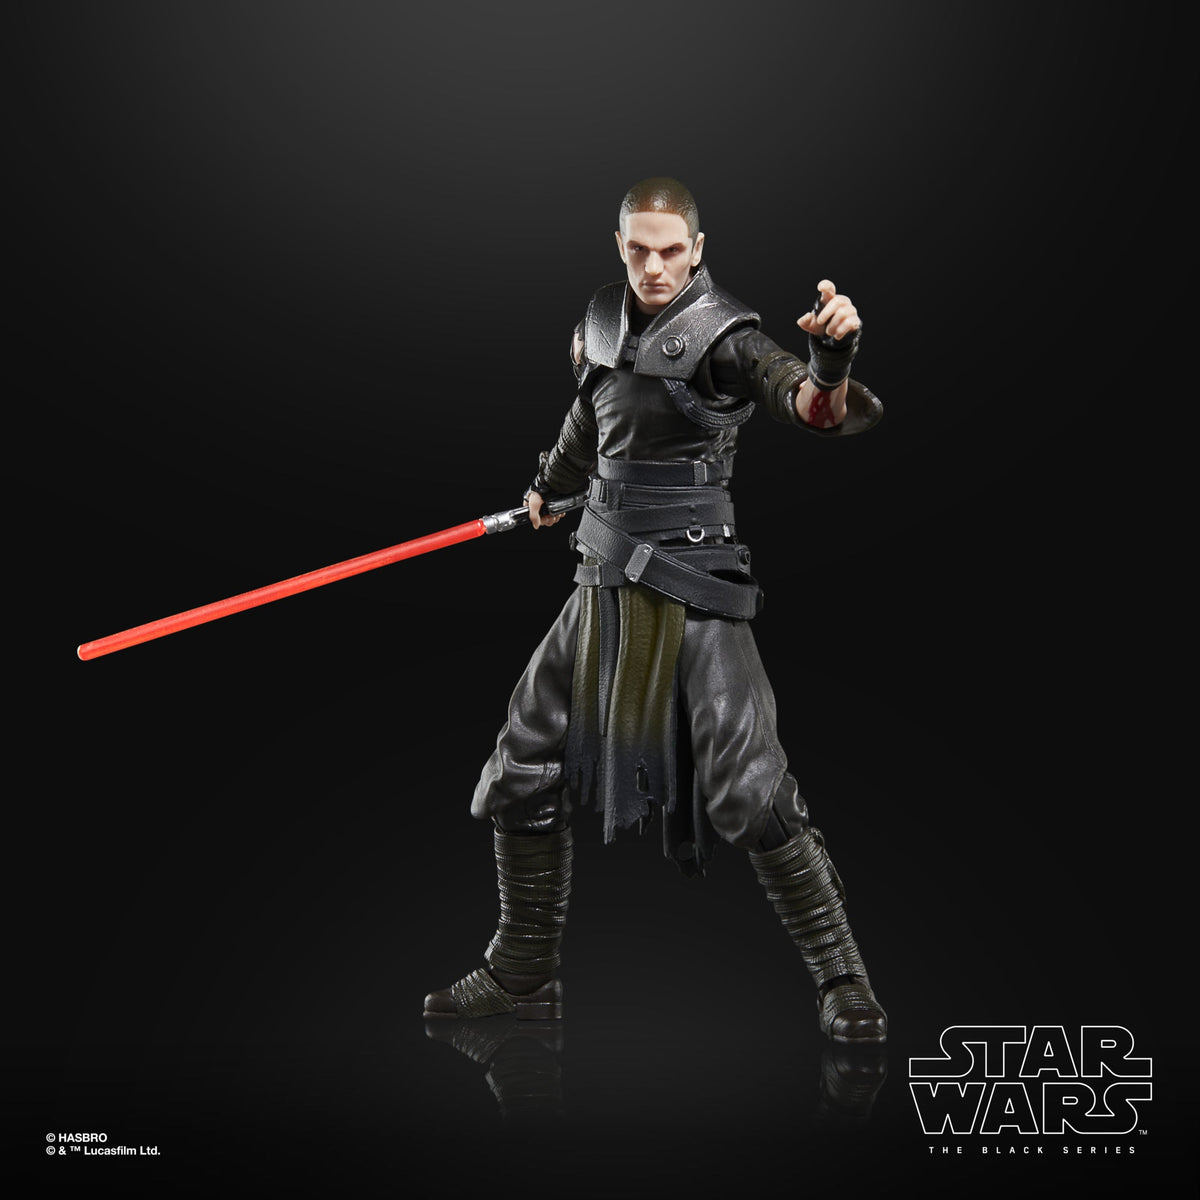 Daily Star Wars Games on X: #Ad 🚨 You can now pre-order the Star Wars The  Force Unleashed Starkiller Black Series figure! It releases February 2024.  Pre-order here:   / X